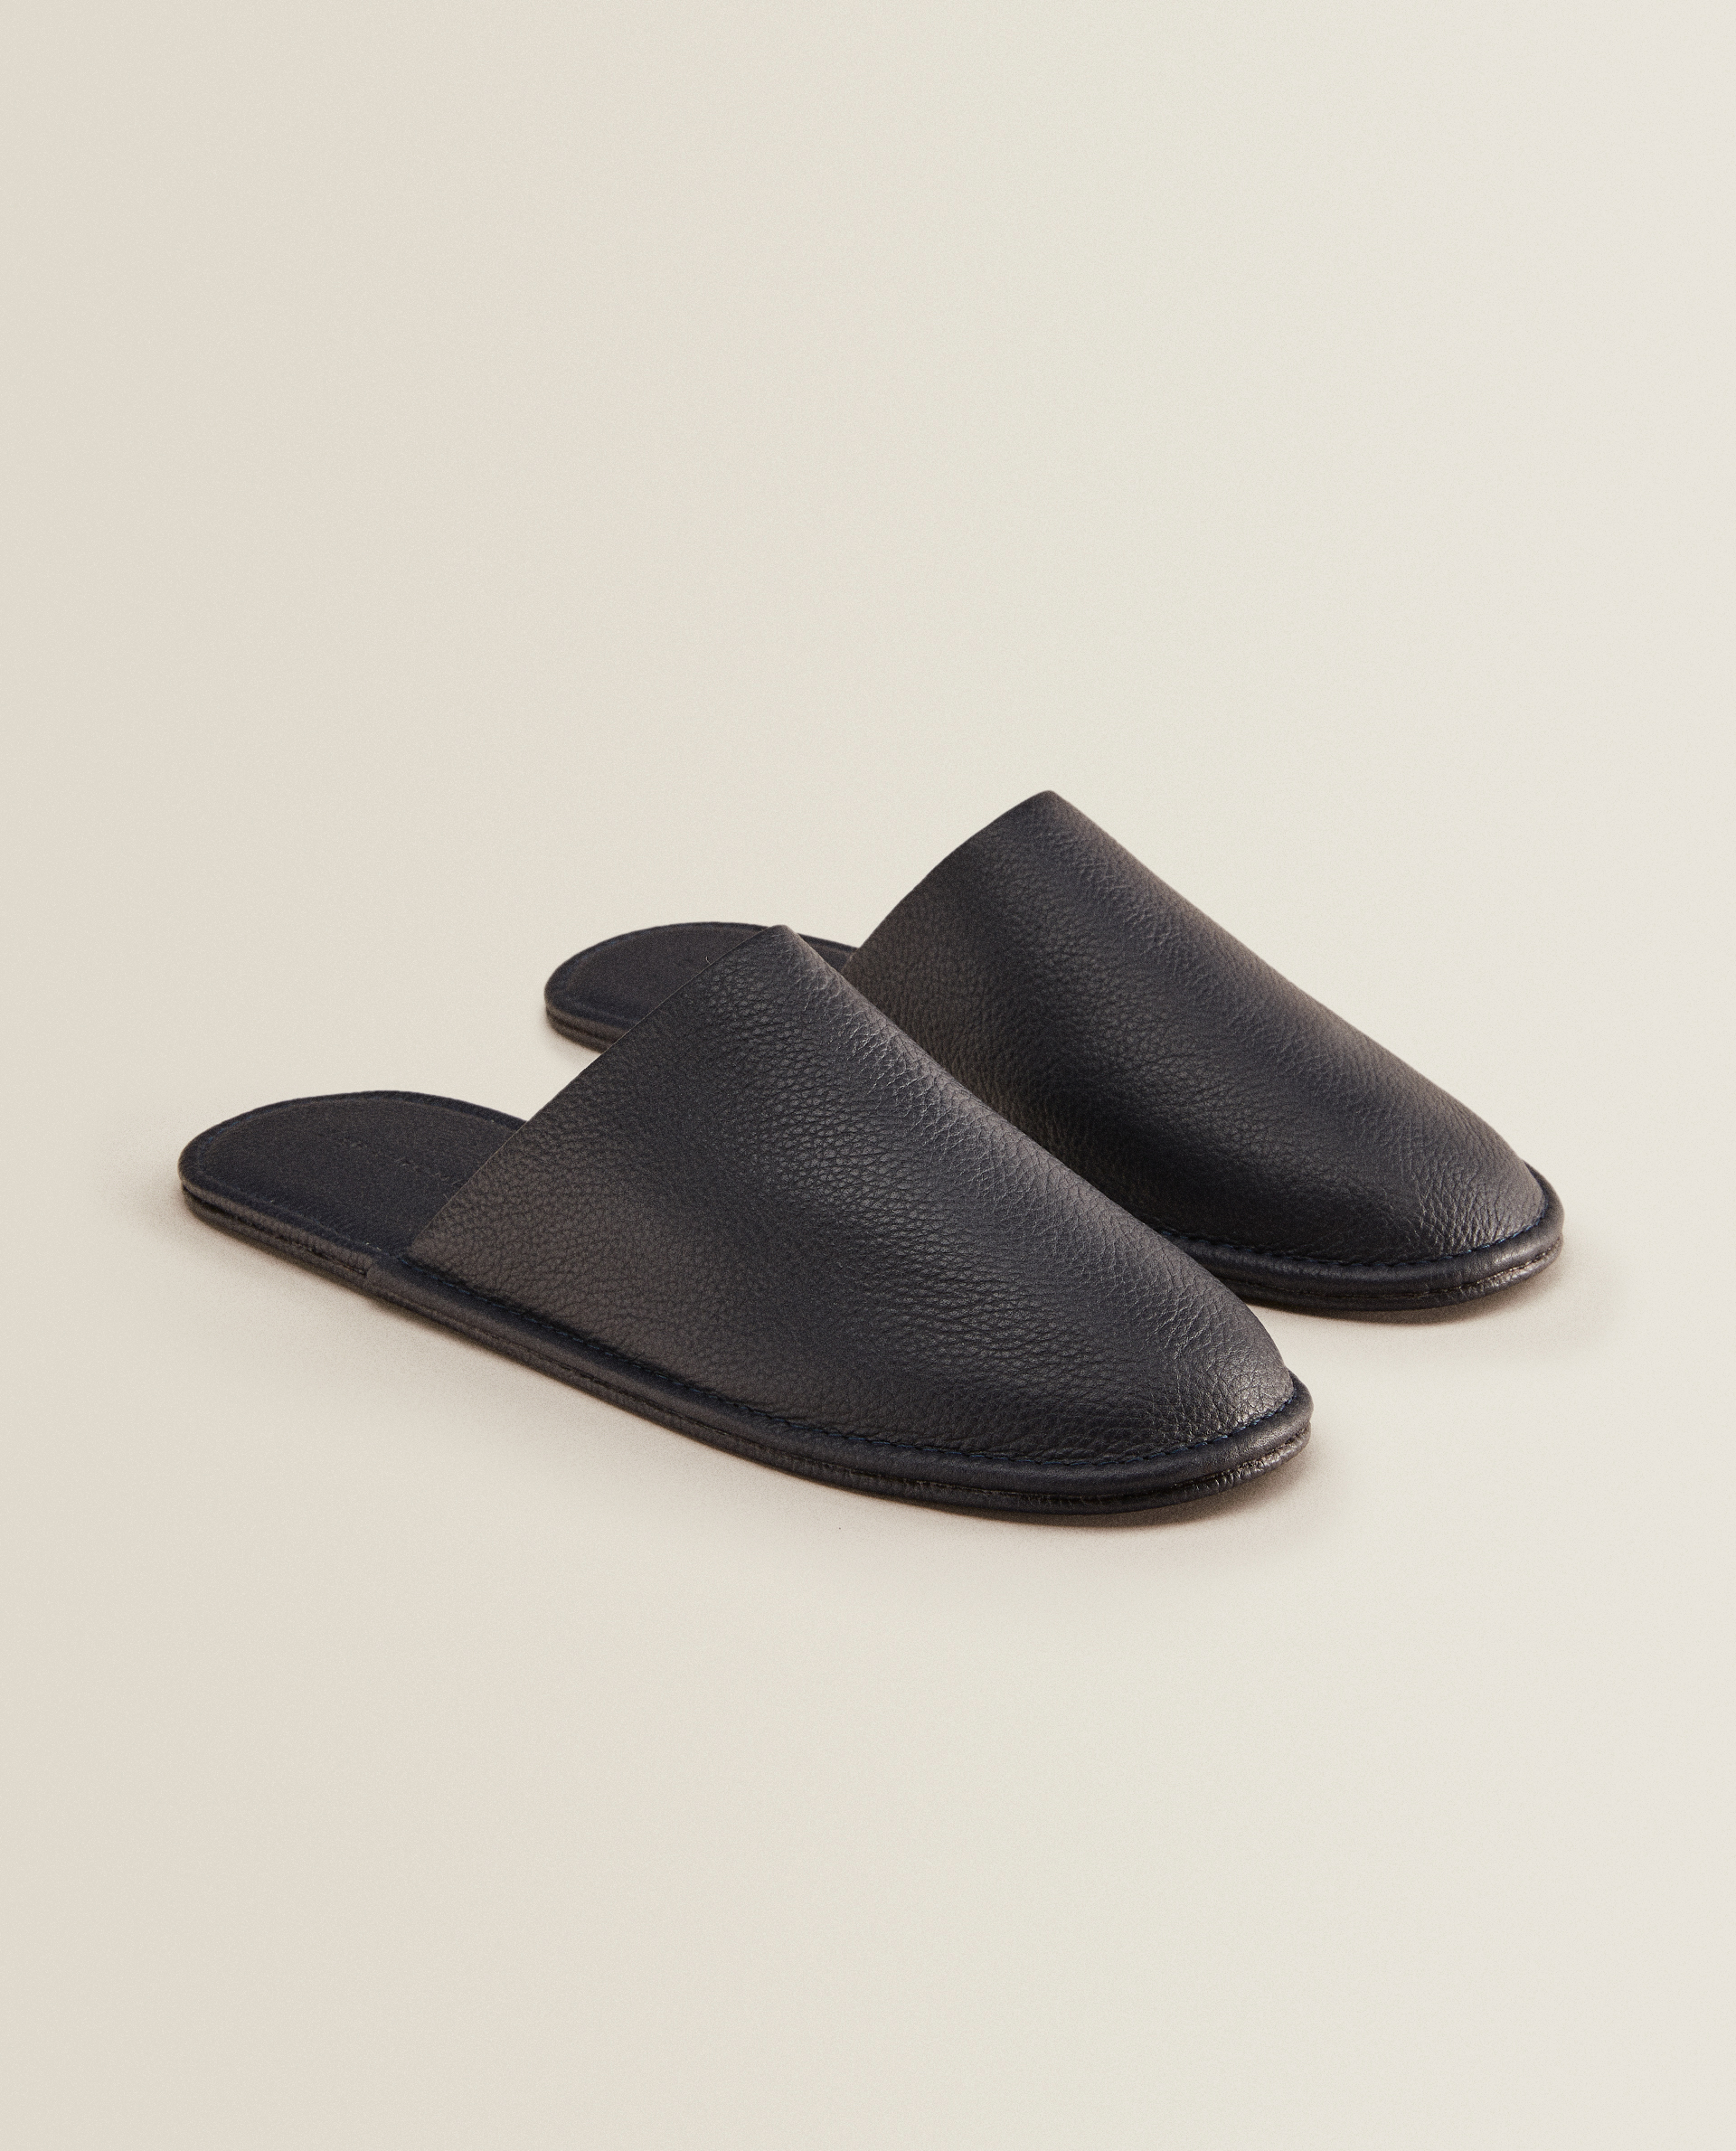 LEATHER SLIPPERS - NEW ARRIVALS | Zara 